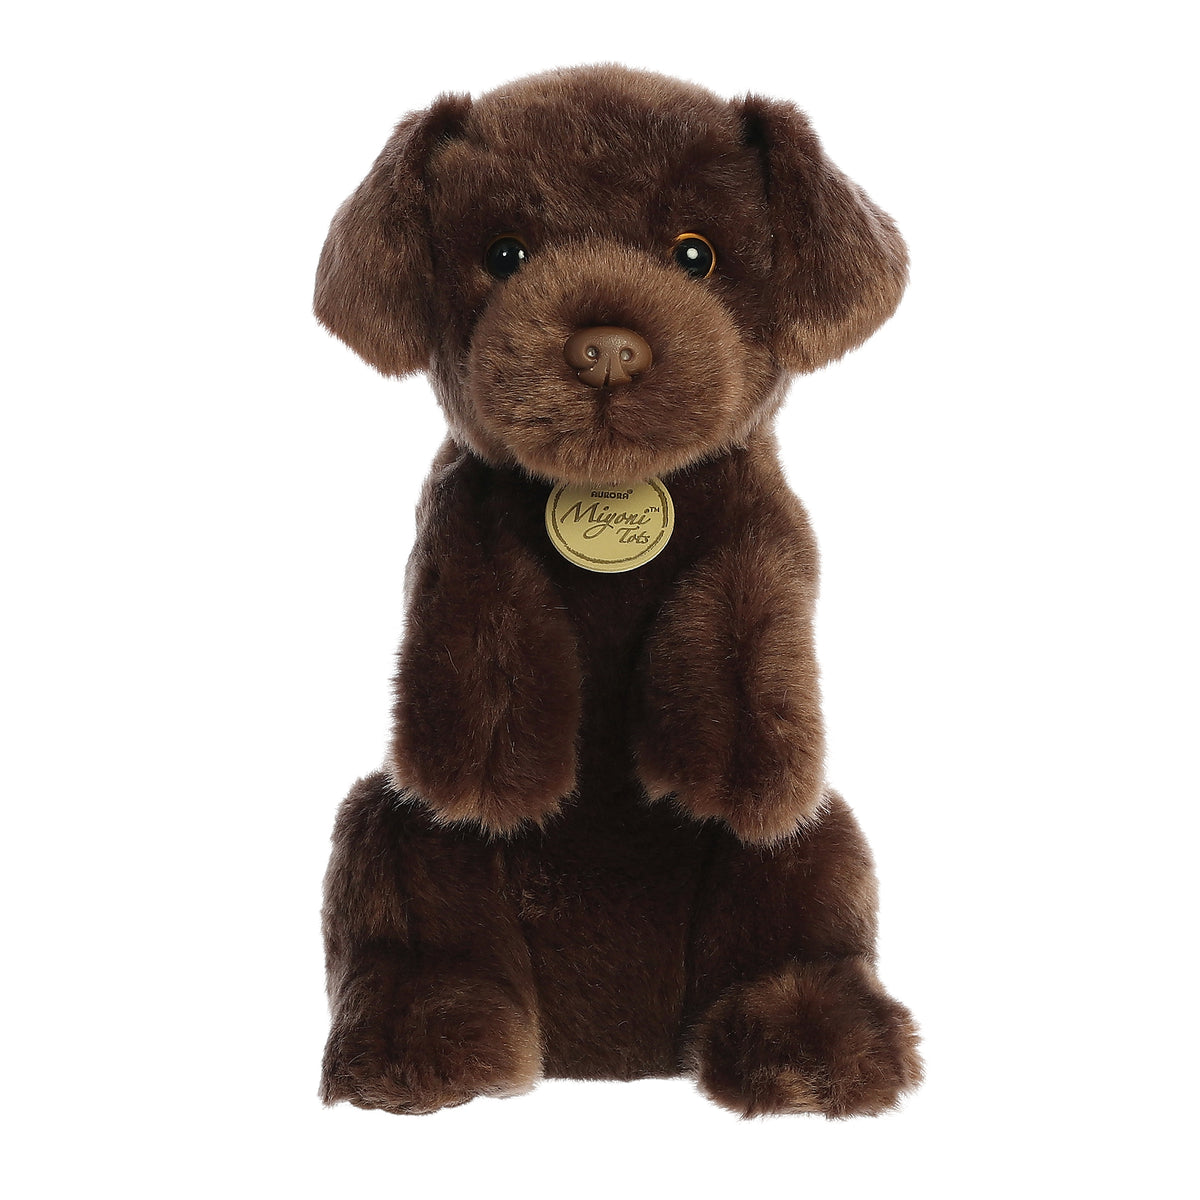 Adorable Miyoni Chocolate Lab plush, sitting playfully with a luxurious dark brown coat, and a realistic plastic nose.